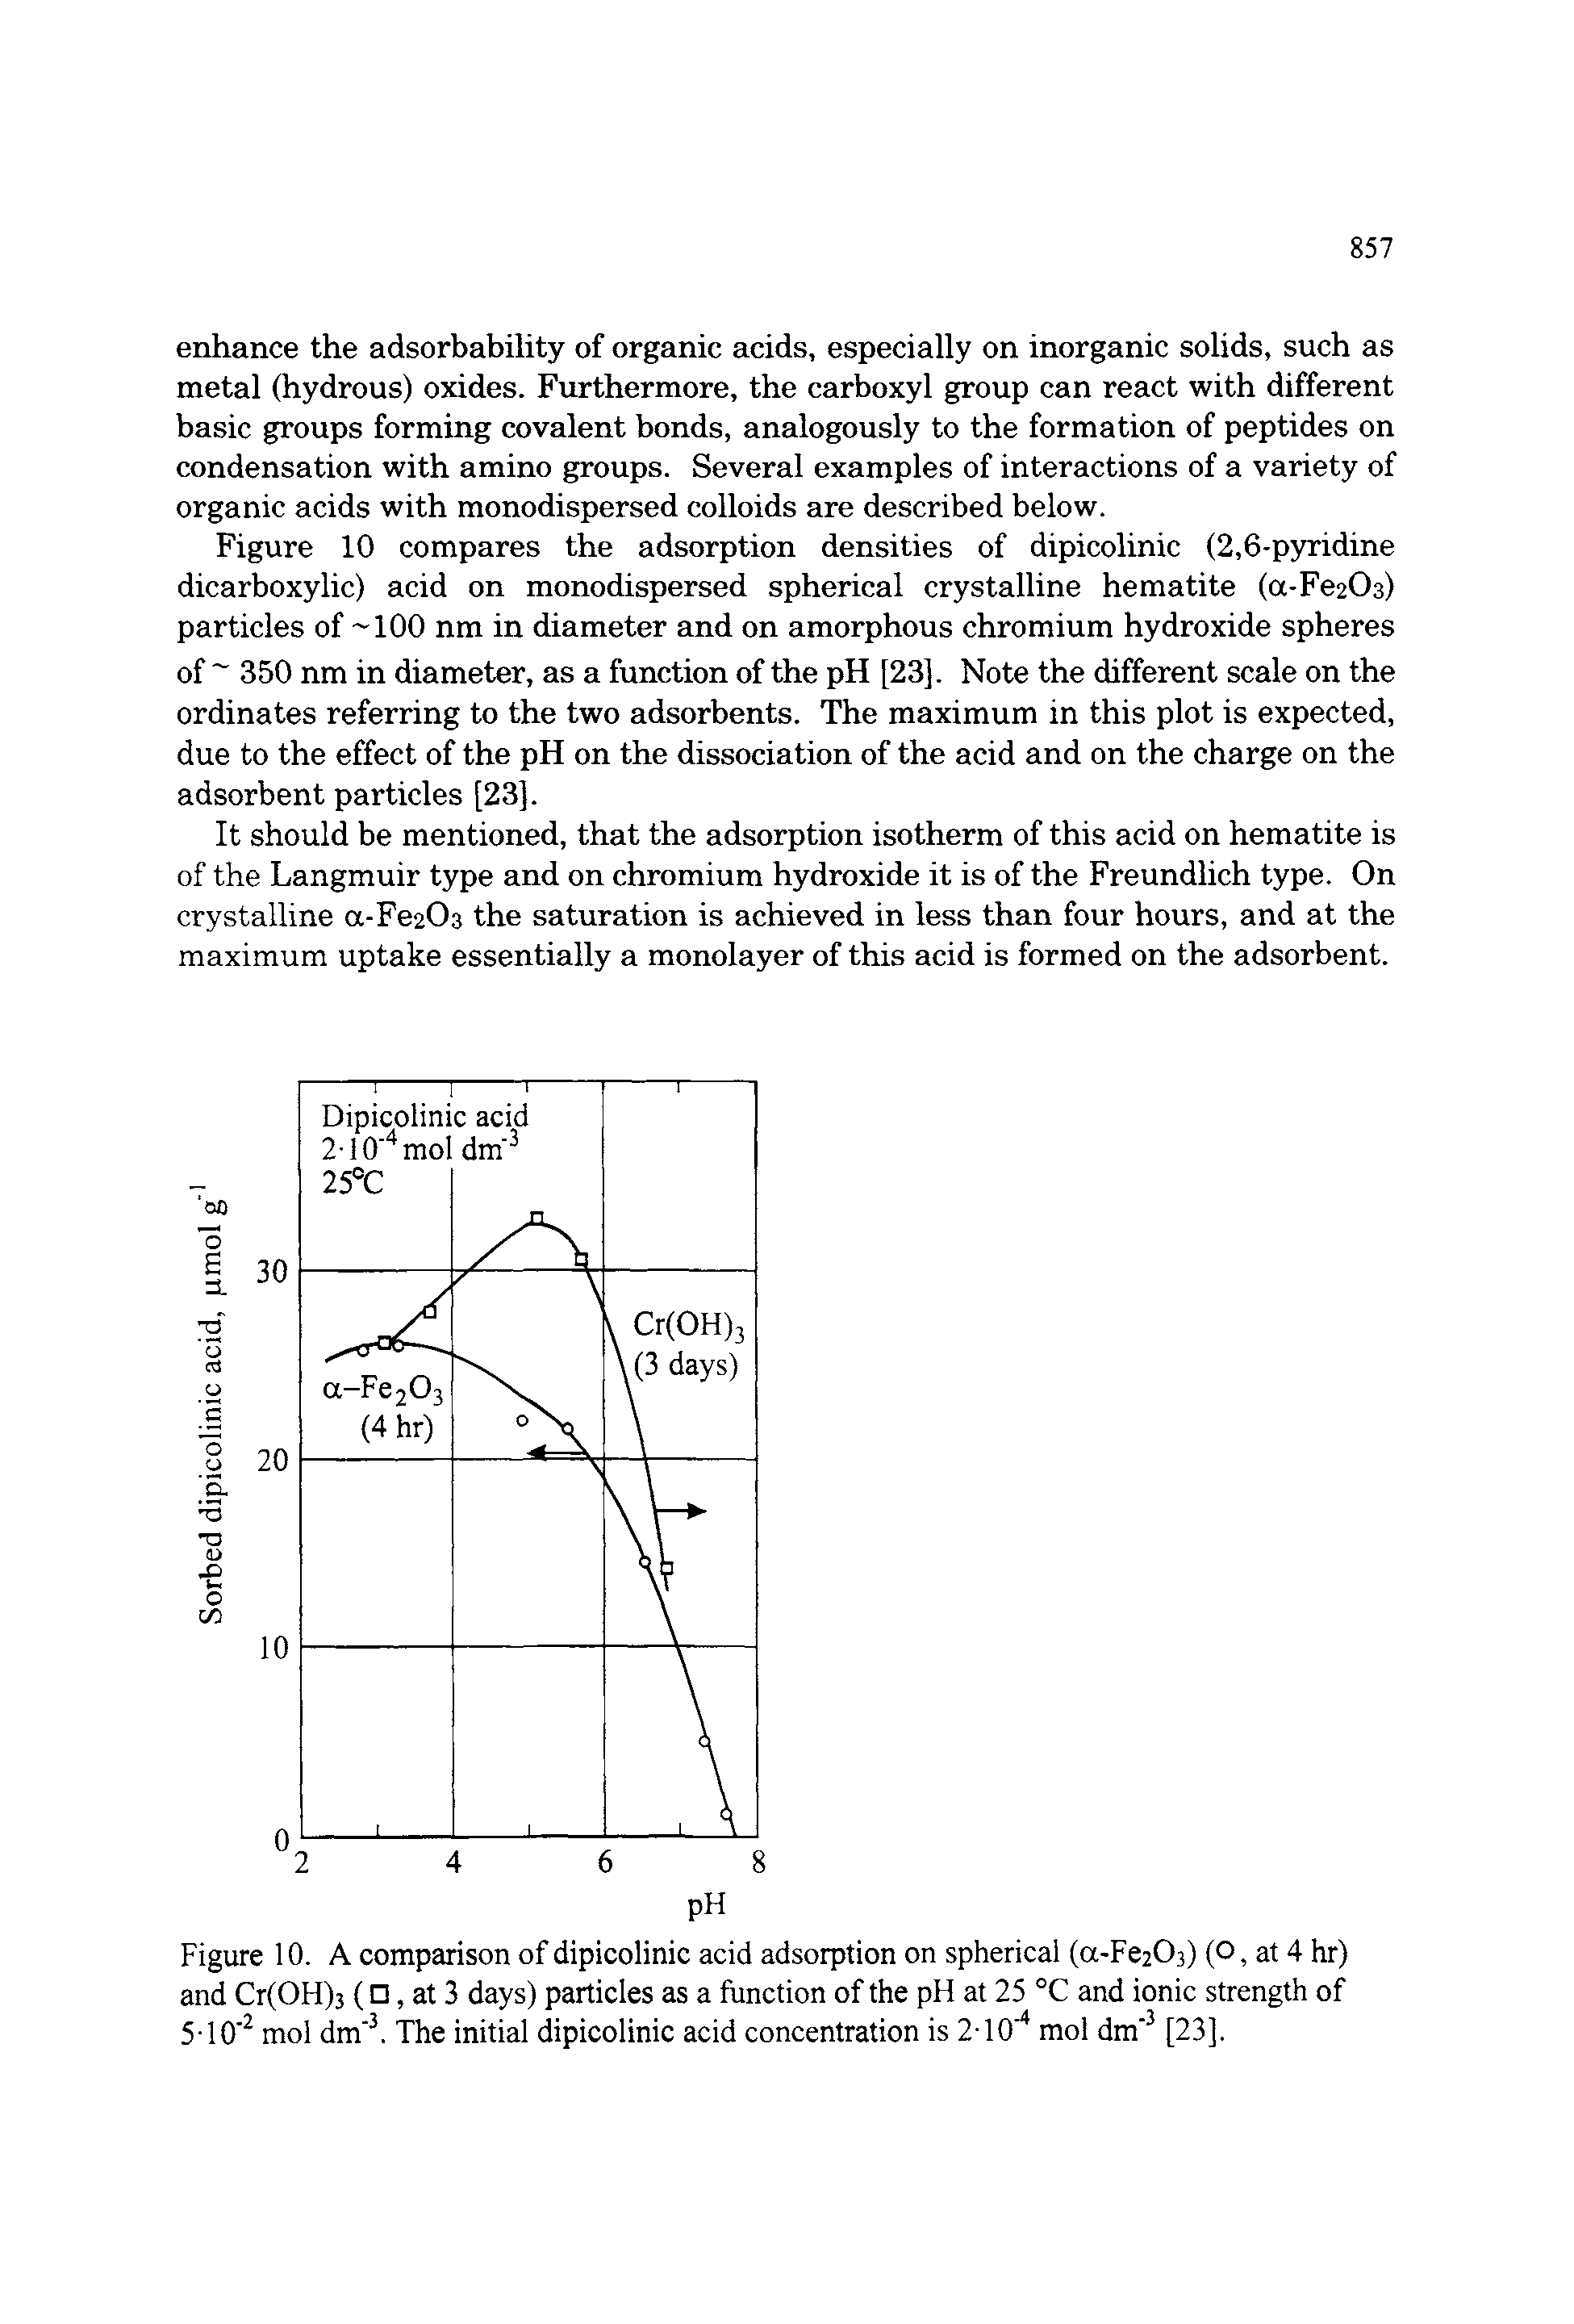 Figure 10. A comparison of dipicolinic acid adsorption on spherical (a-Fe203) (O, at 4 hr) and Cr(OH)3 ( , at 3 days) particles as a function of the pH at 25 °C and ionic strength of 5-10 mol dm The initial dipicolinic acid concentration is 2-10 mol dm [23],...